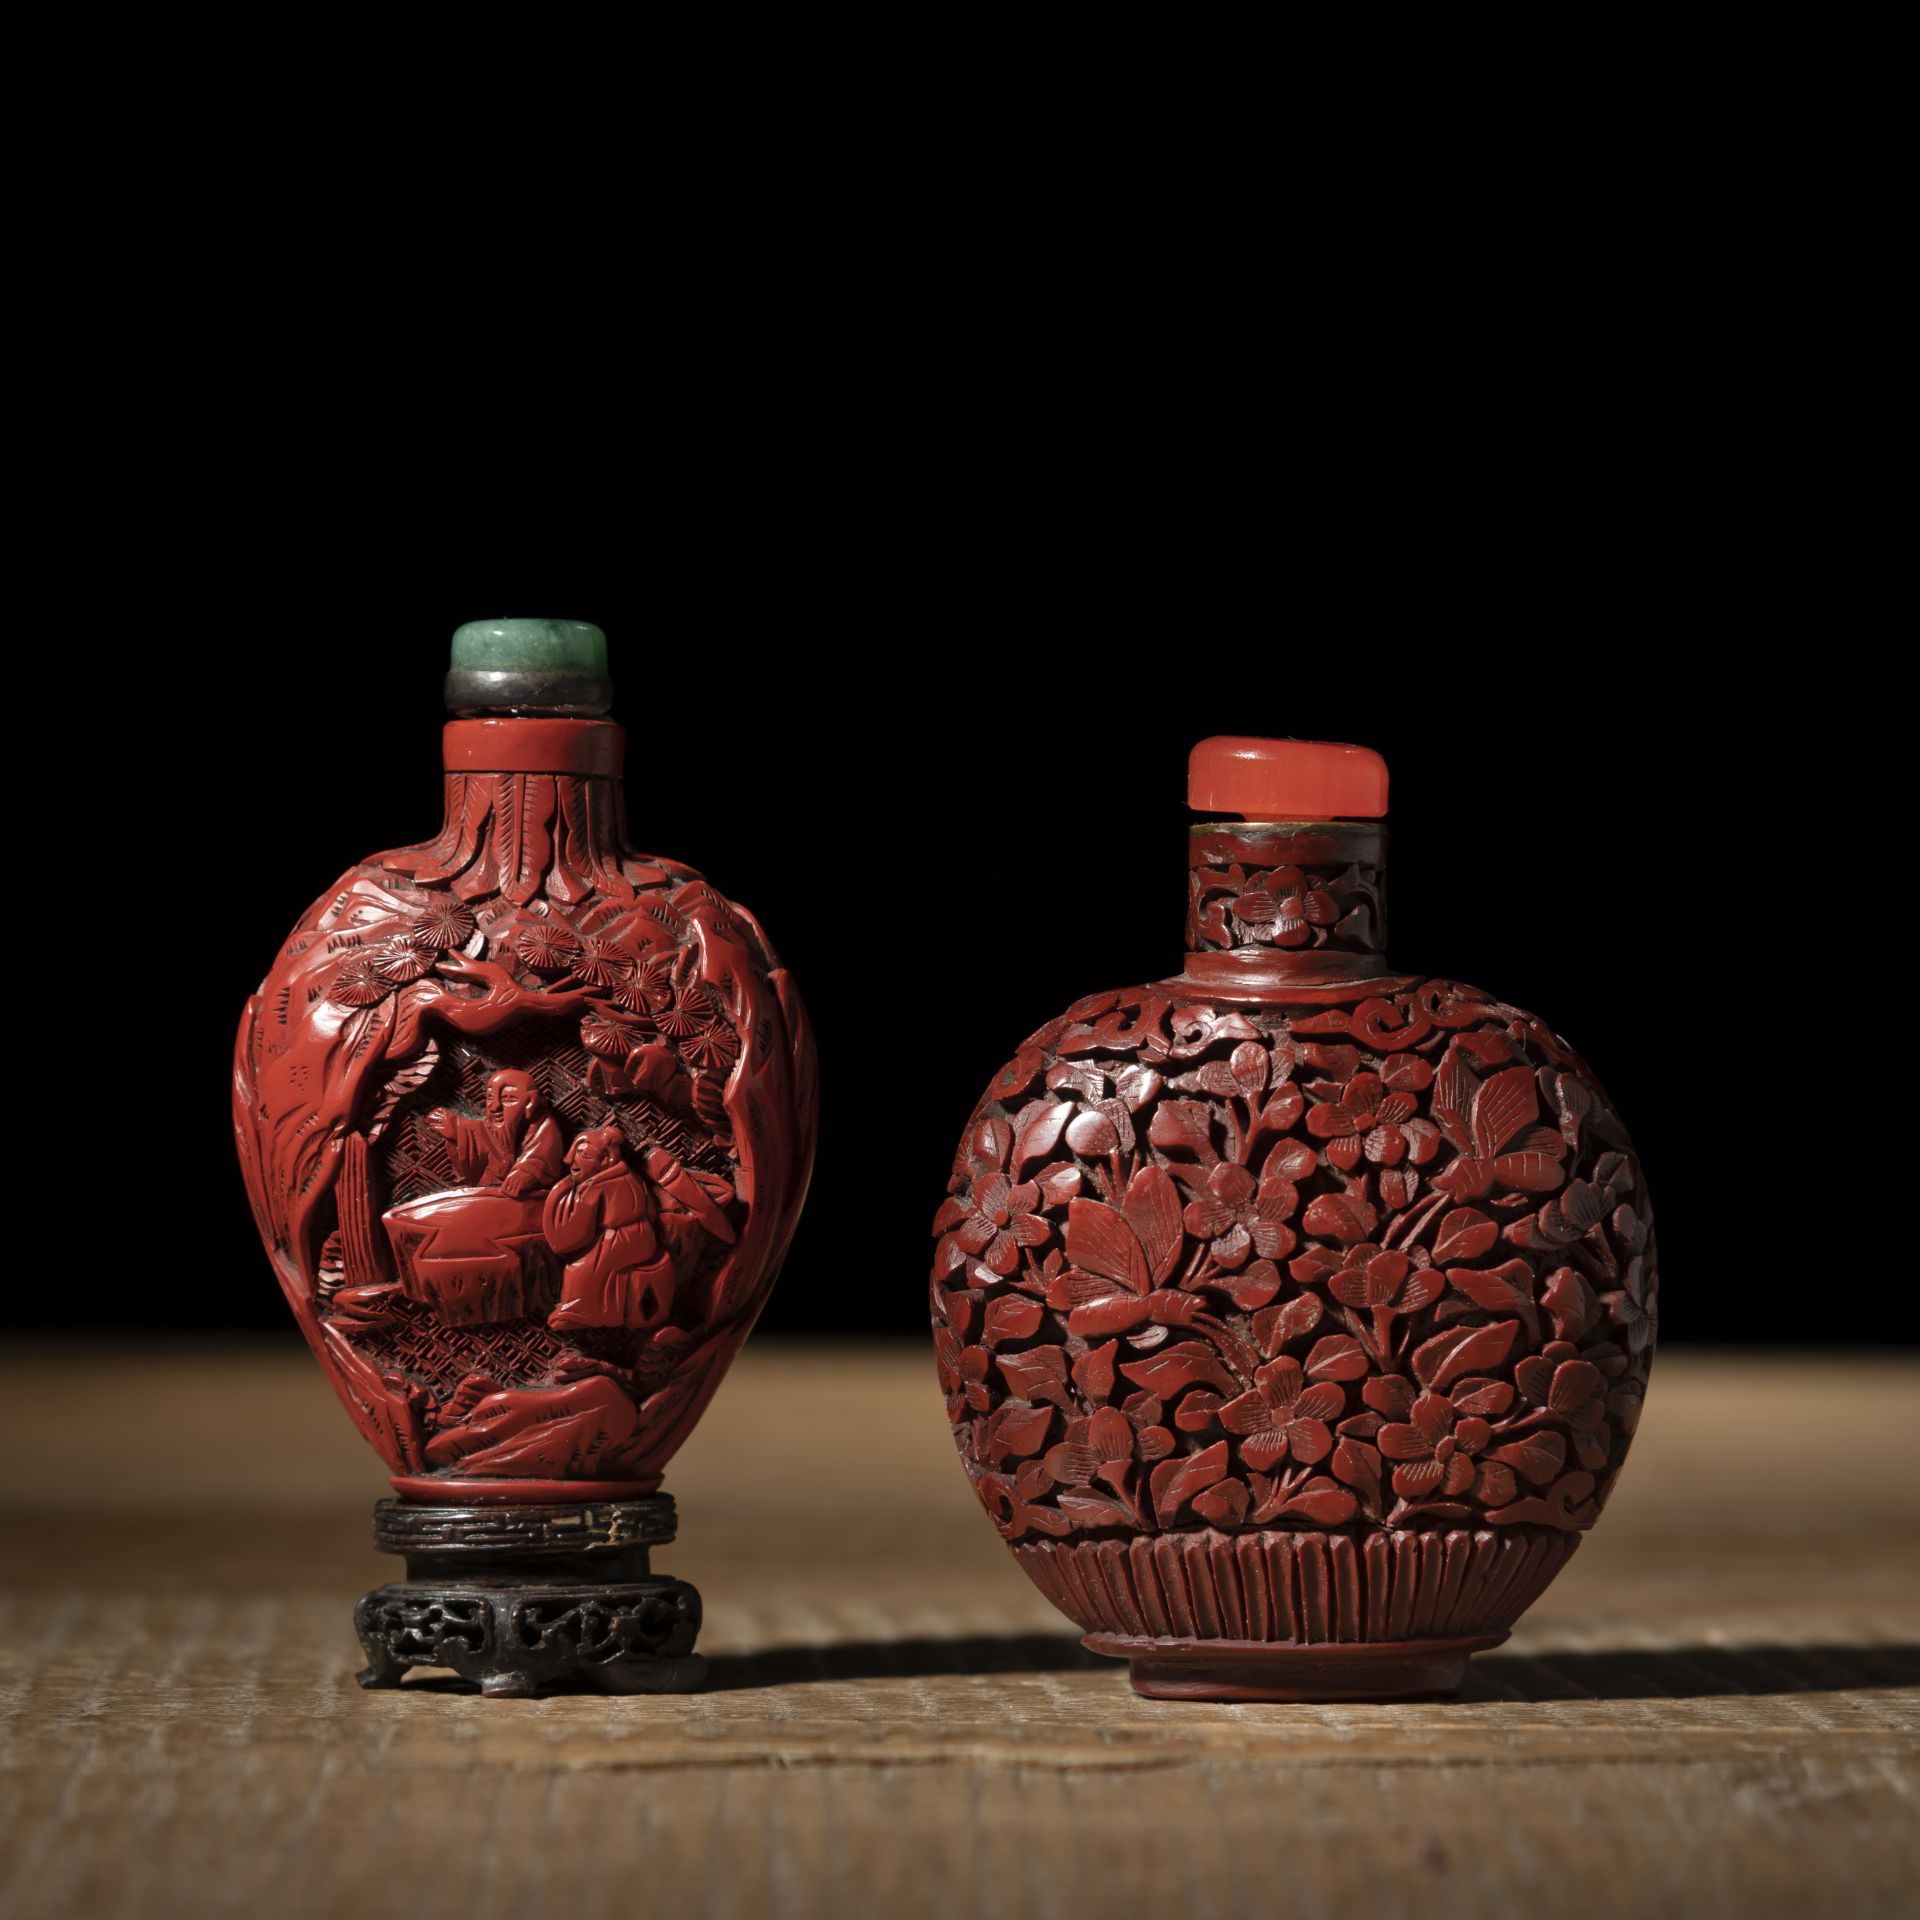 TWO RED LACQUER CARVED SNUFF BOTTLES DEPICTING FLOWERS, BIRDS AND SCHOLARS